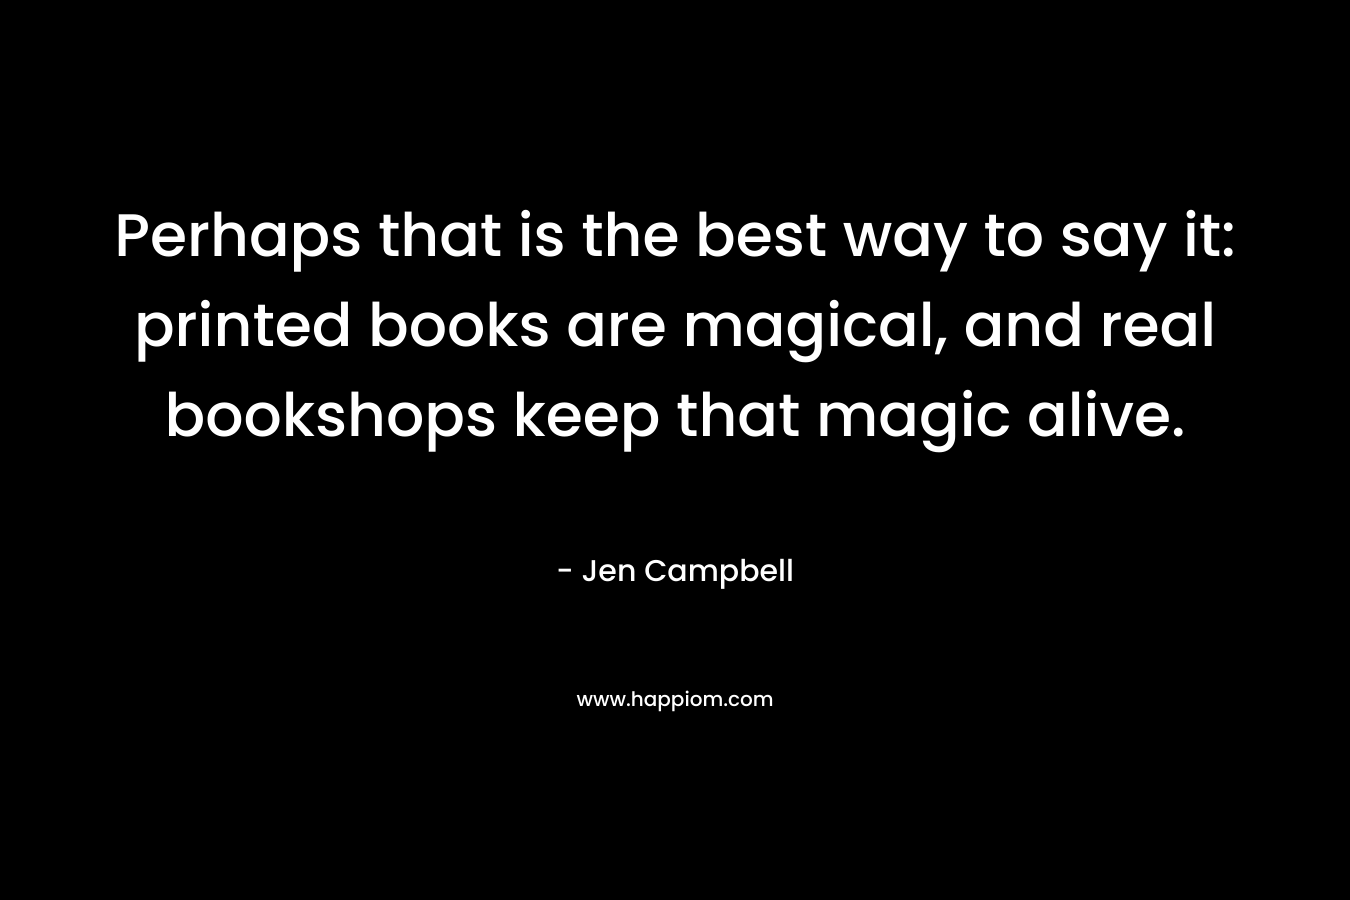 Perhaps that is the best way to say it: printed books are magical, and real bookshops keep that magic alive. – Jen Campbell